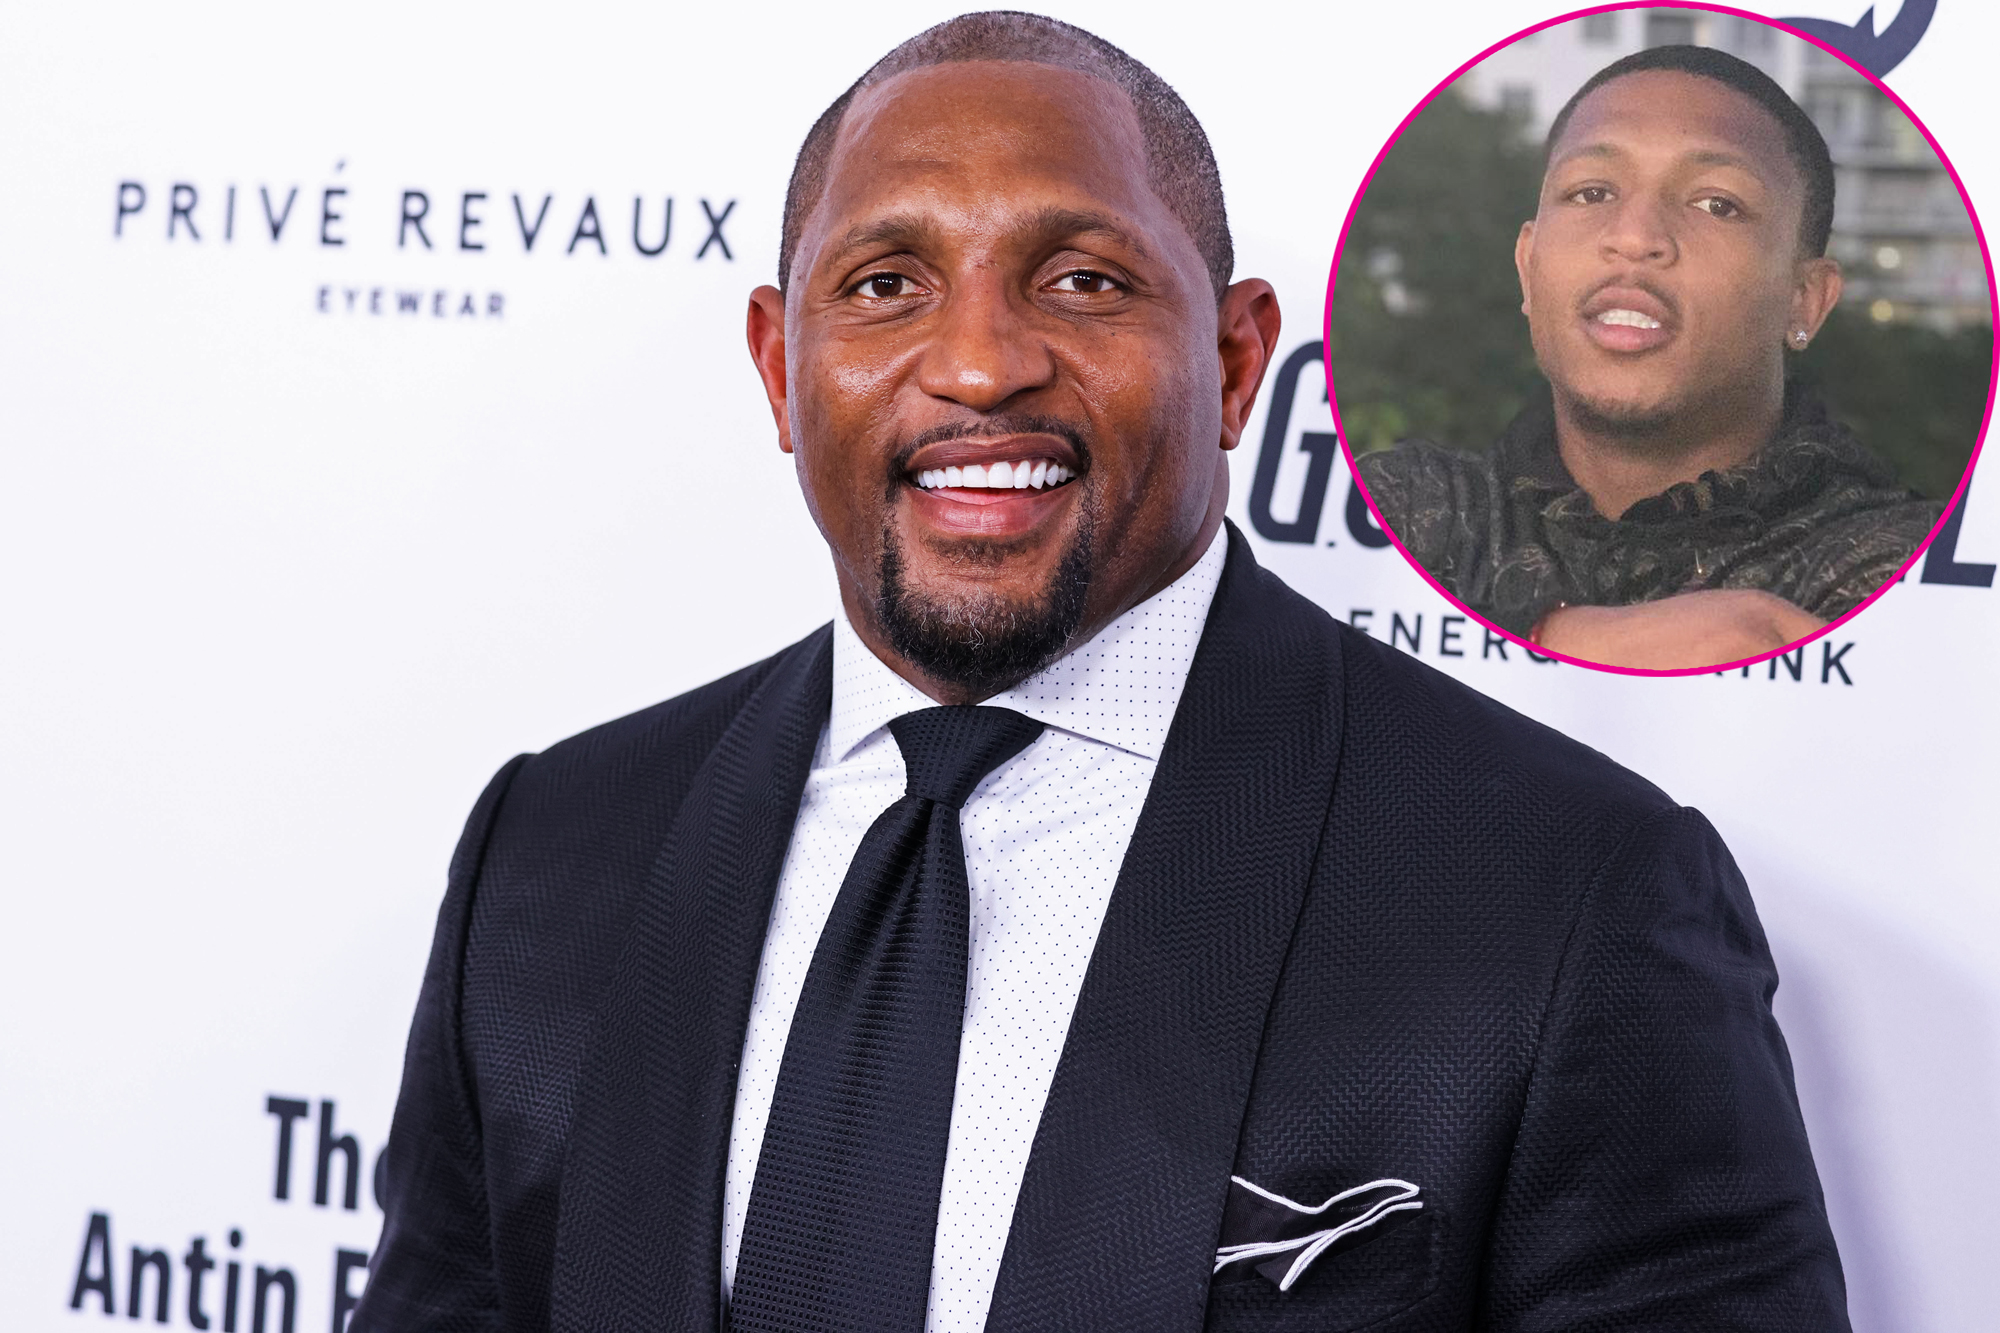 Ray Lewis III, son of NFL legend, dies at 28 – NBC 6 South Florida